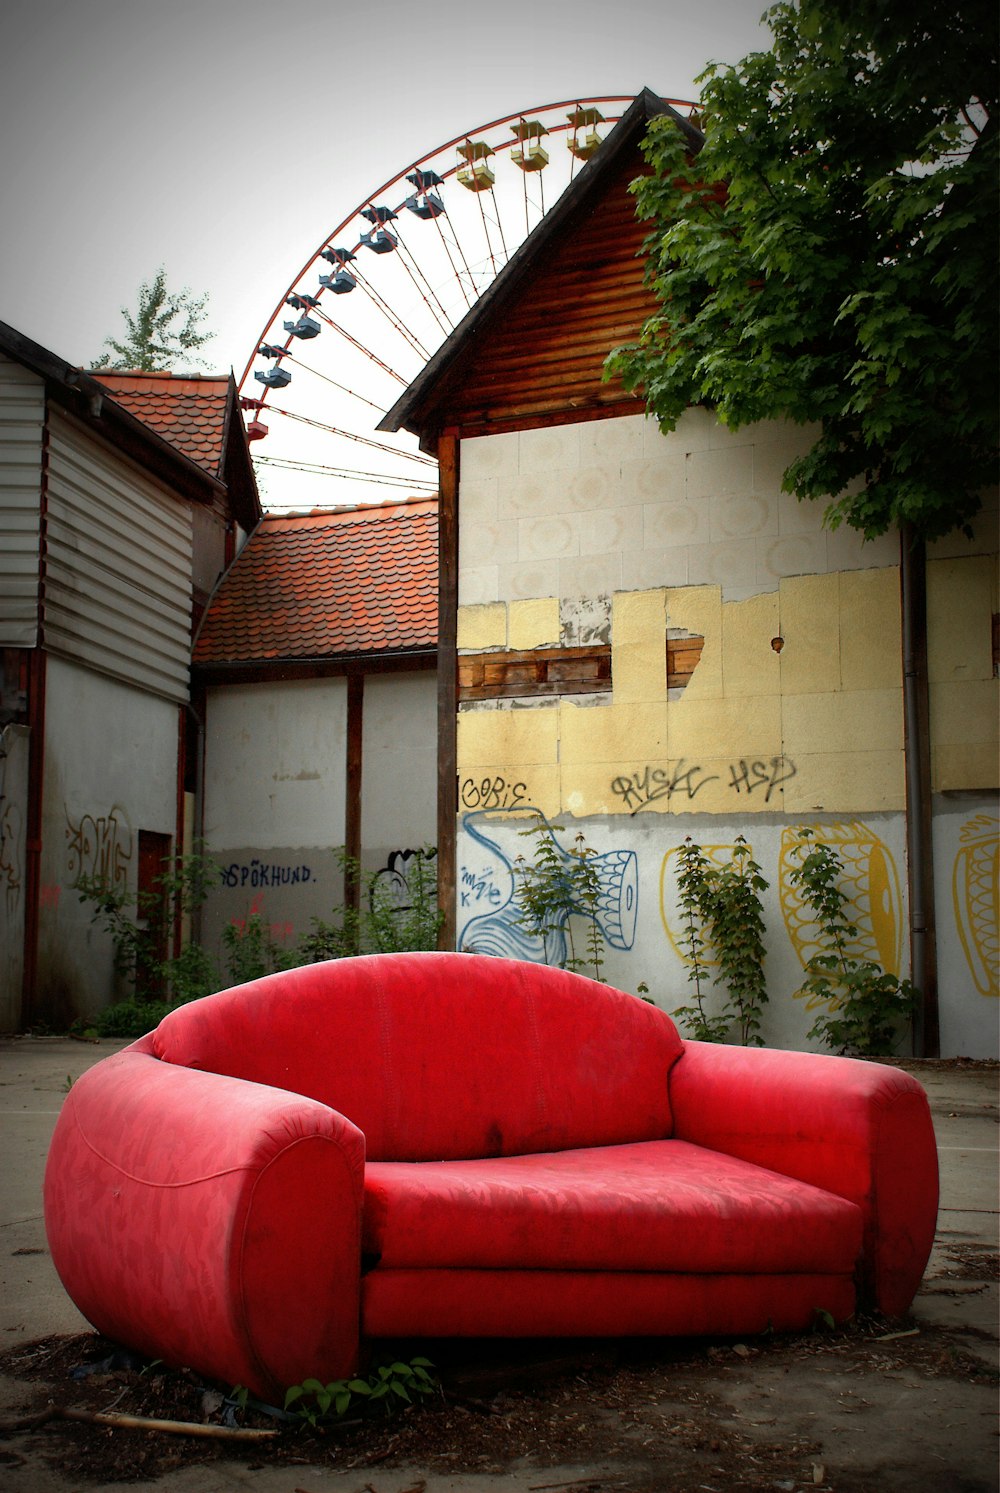 a red couch in front of a wall with graffiti